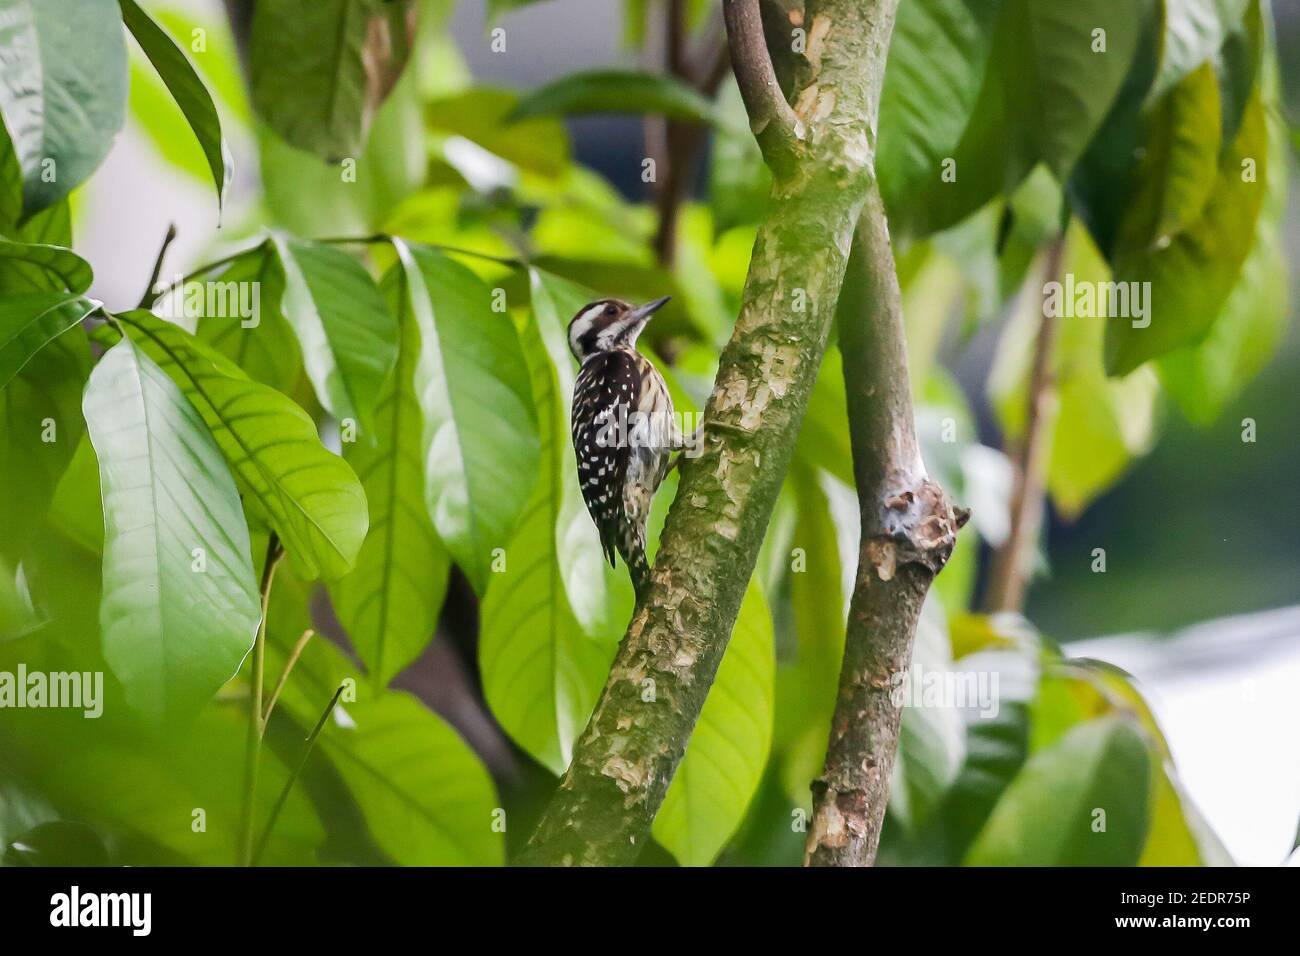 (210215) -- MANILA, Feb. 15, 2021 (Xinhua) -- A Philippine pygmy woodpecker is seen perched on a tree at a park in Manila, the Philippines on Feb. 15, 2021. (Xinhua/Rouelle Umali) Stock Photo